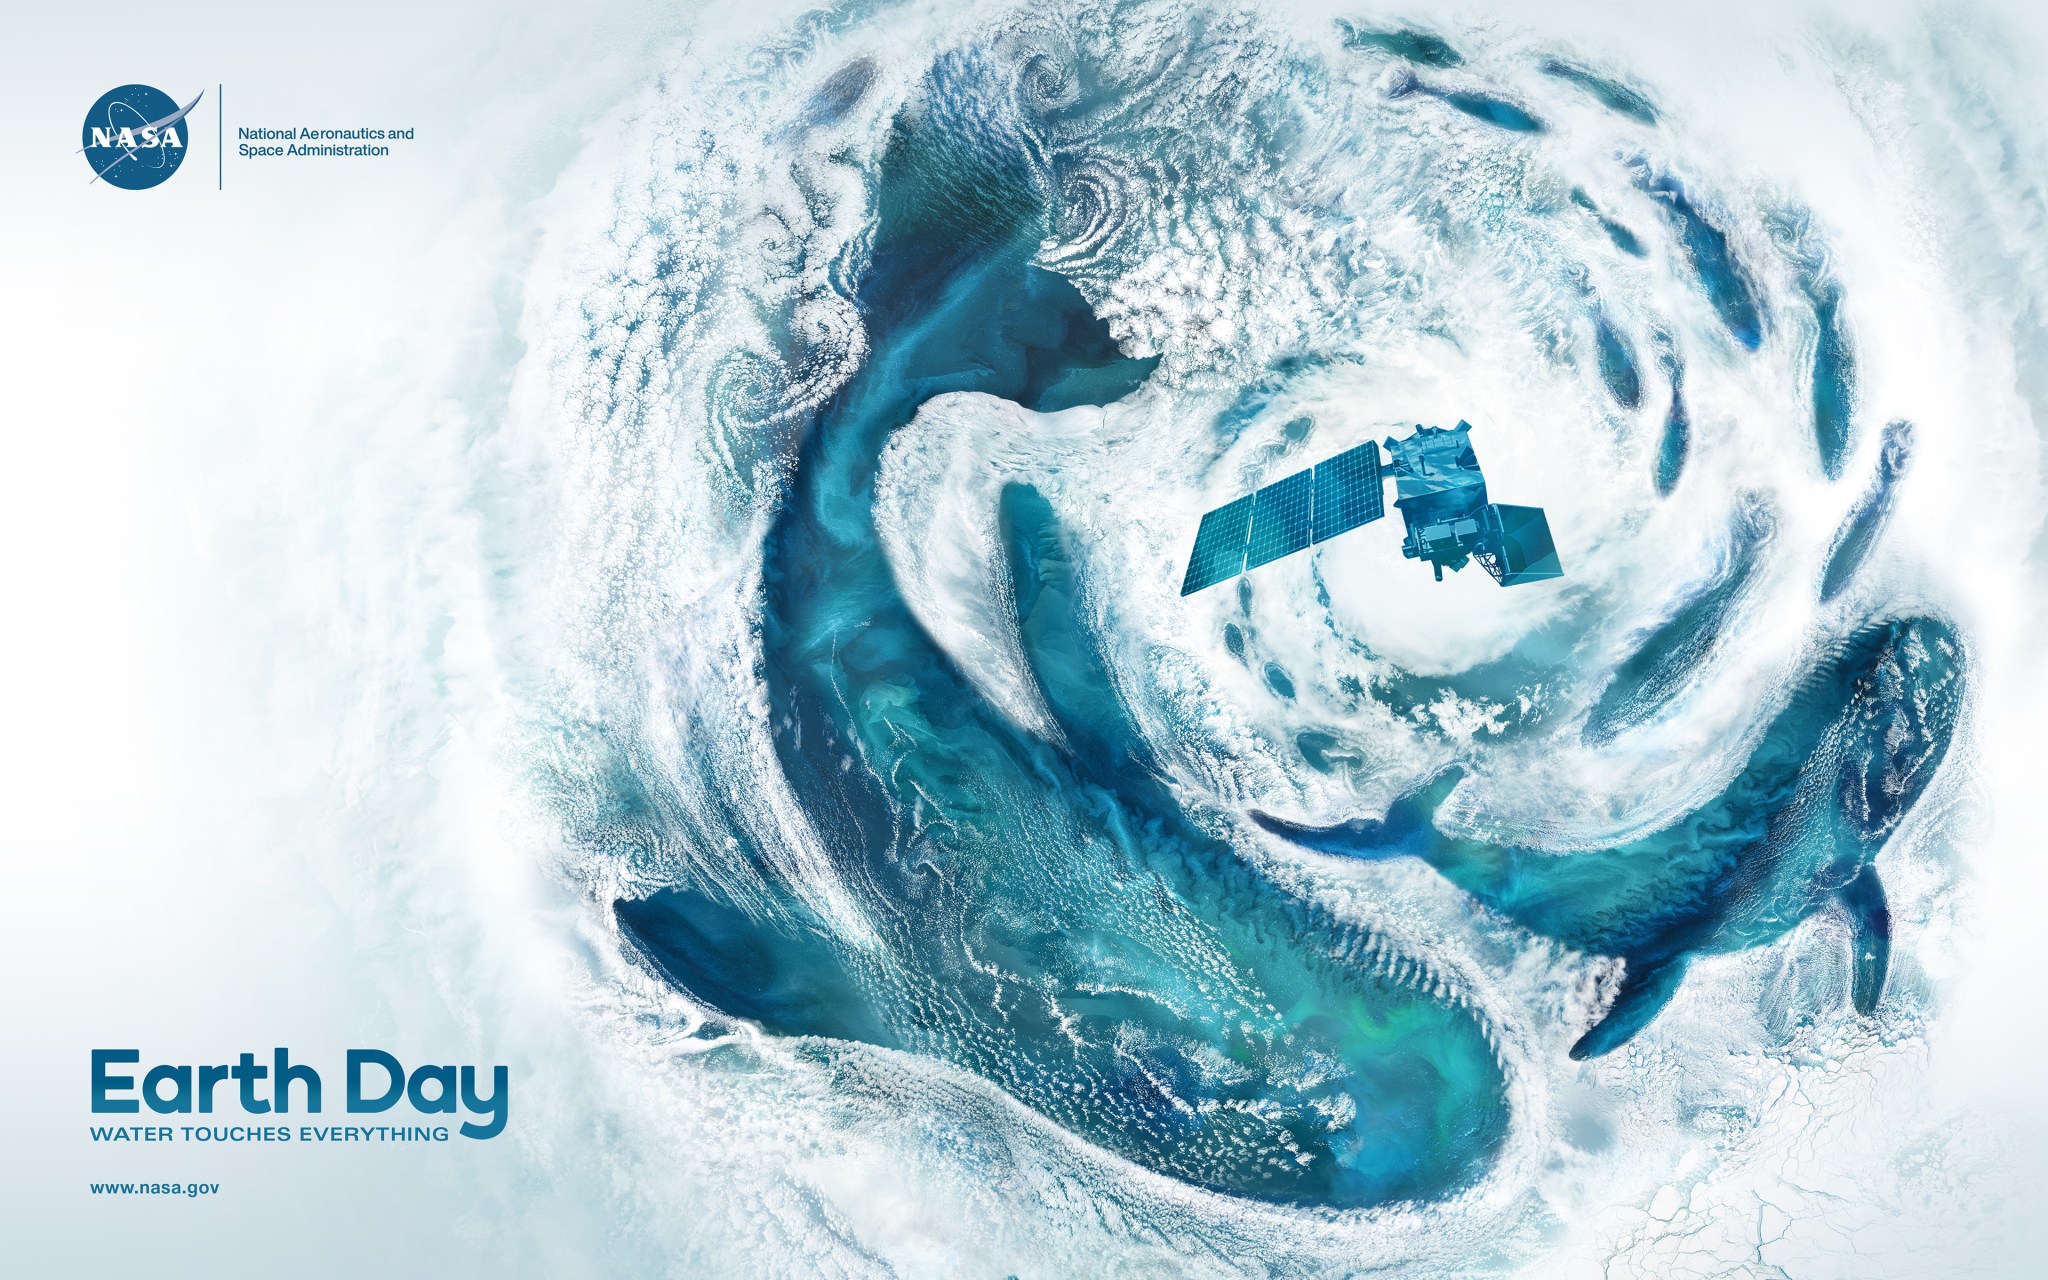 This 2024 Earth Day poster is an ocean themed vertical 15x30 illustration created from NASA satellite cloud imagery overlaid on ocean data. The white cloud imagery wraps around shapes, defining three whales and a school of fish. Swirly cloud patterns, called Von Kármán Vortices, create the feeling of movement in the composition. The focal point is a cyclone in the upper third of the poster. At the center flies the recently launched PACE satellite. The ocean imagery - composed of blues, aquas, and greens - is filled with subtle color changes and undulating patterns created by churning sediment, organic matter and phytoplankton.